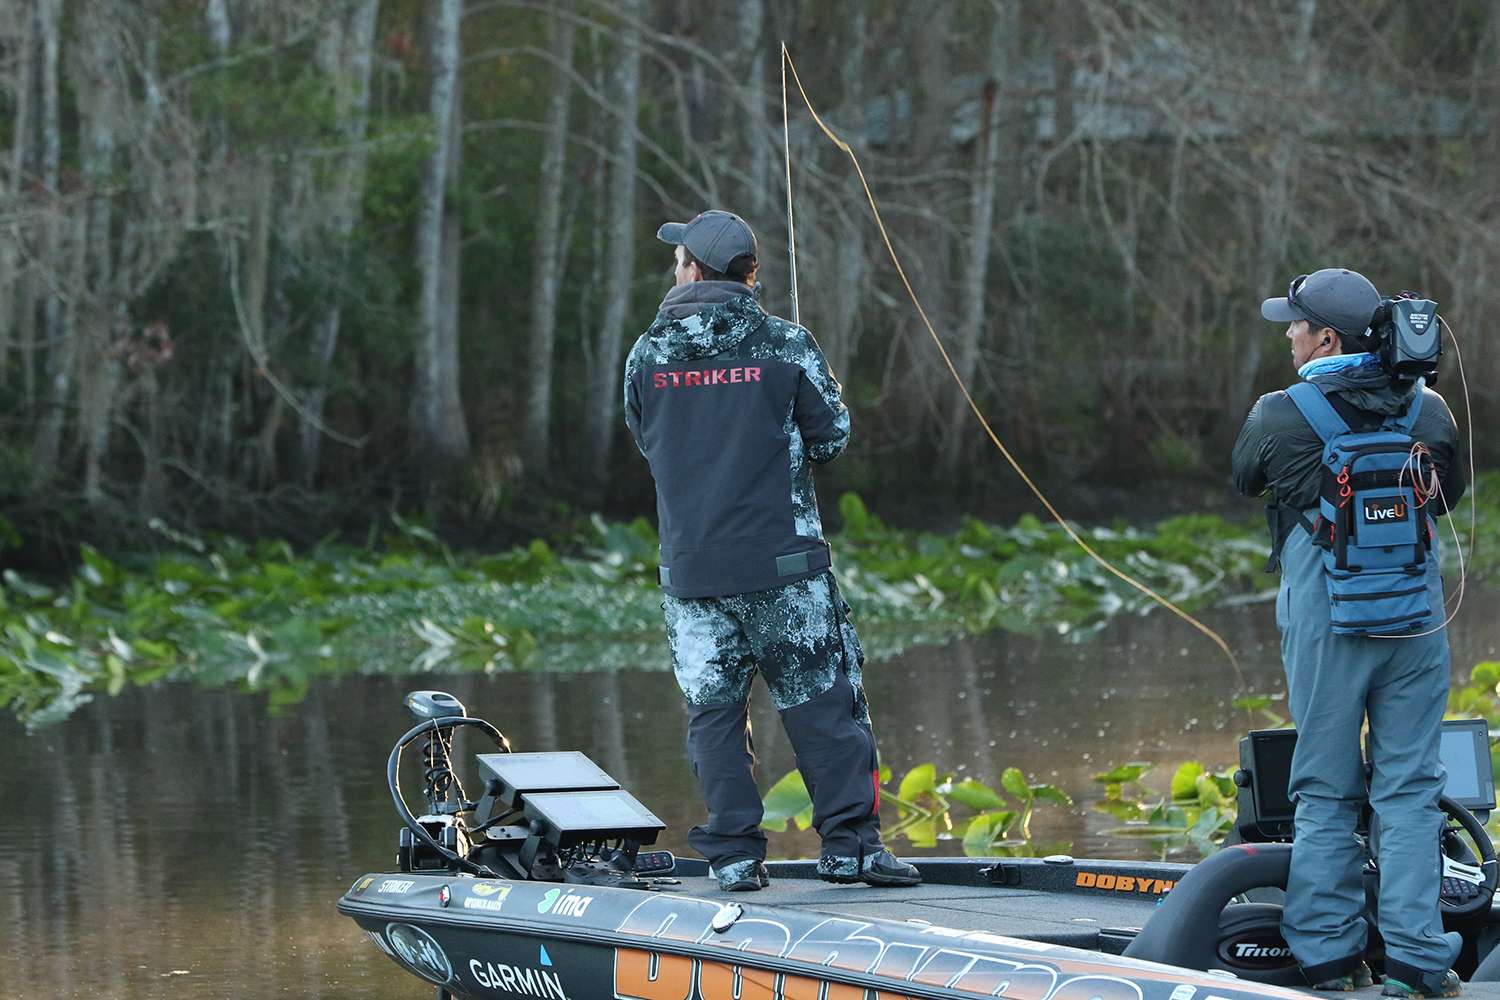 Follow along as Paul Mueller wins the 2020 AFTCO Bassmaster Elite at St. Johns River thanks to a few key bites.